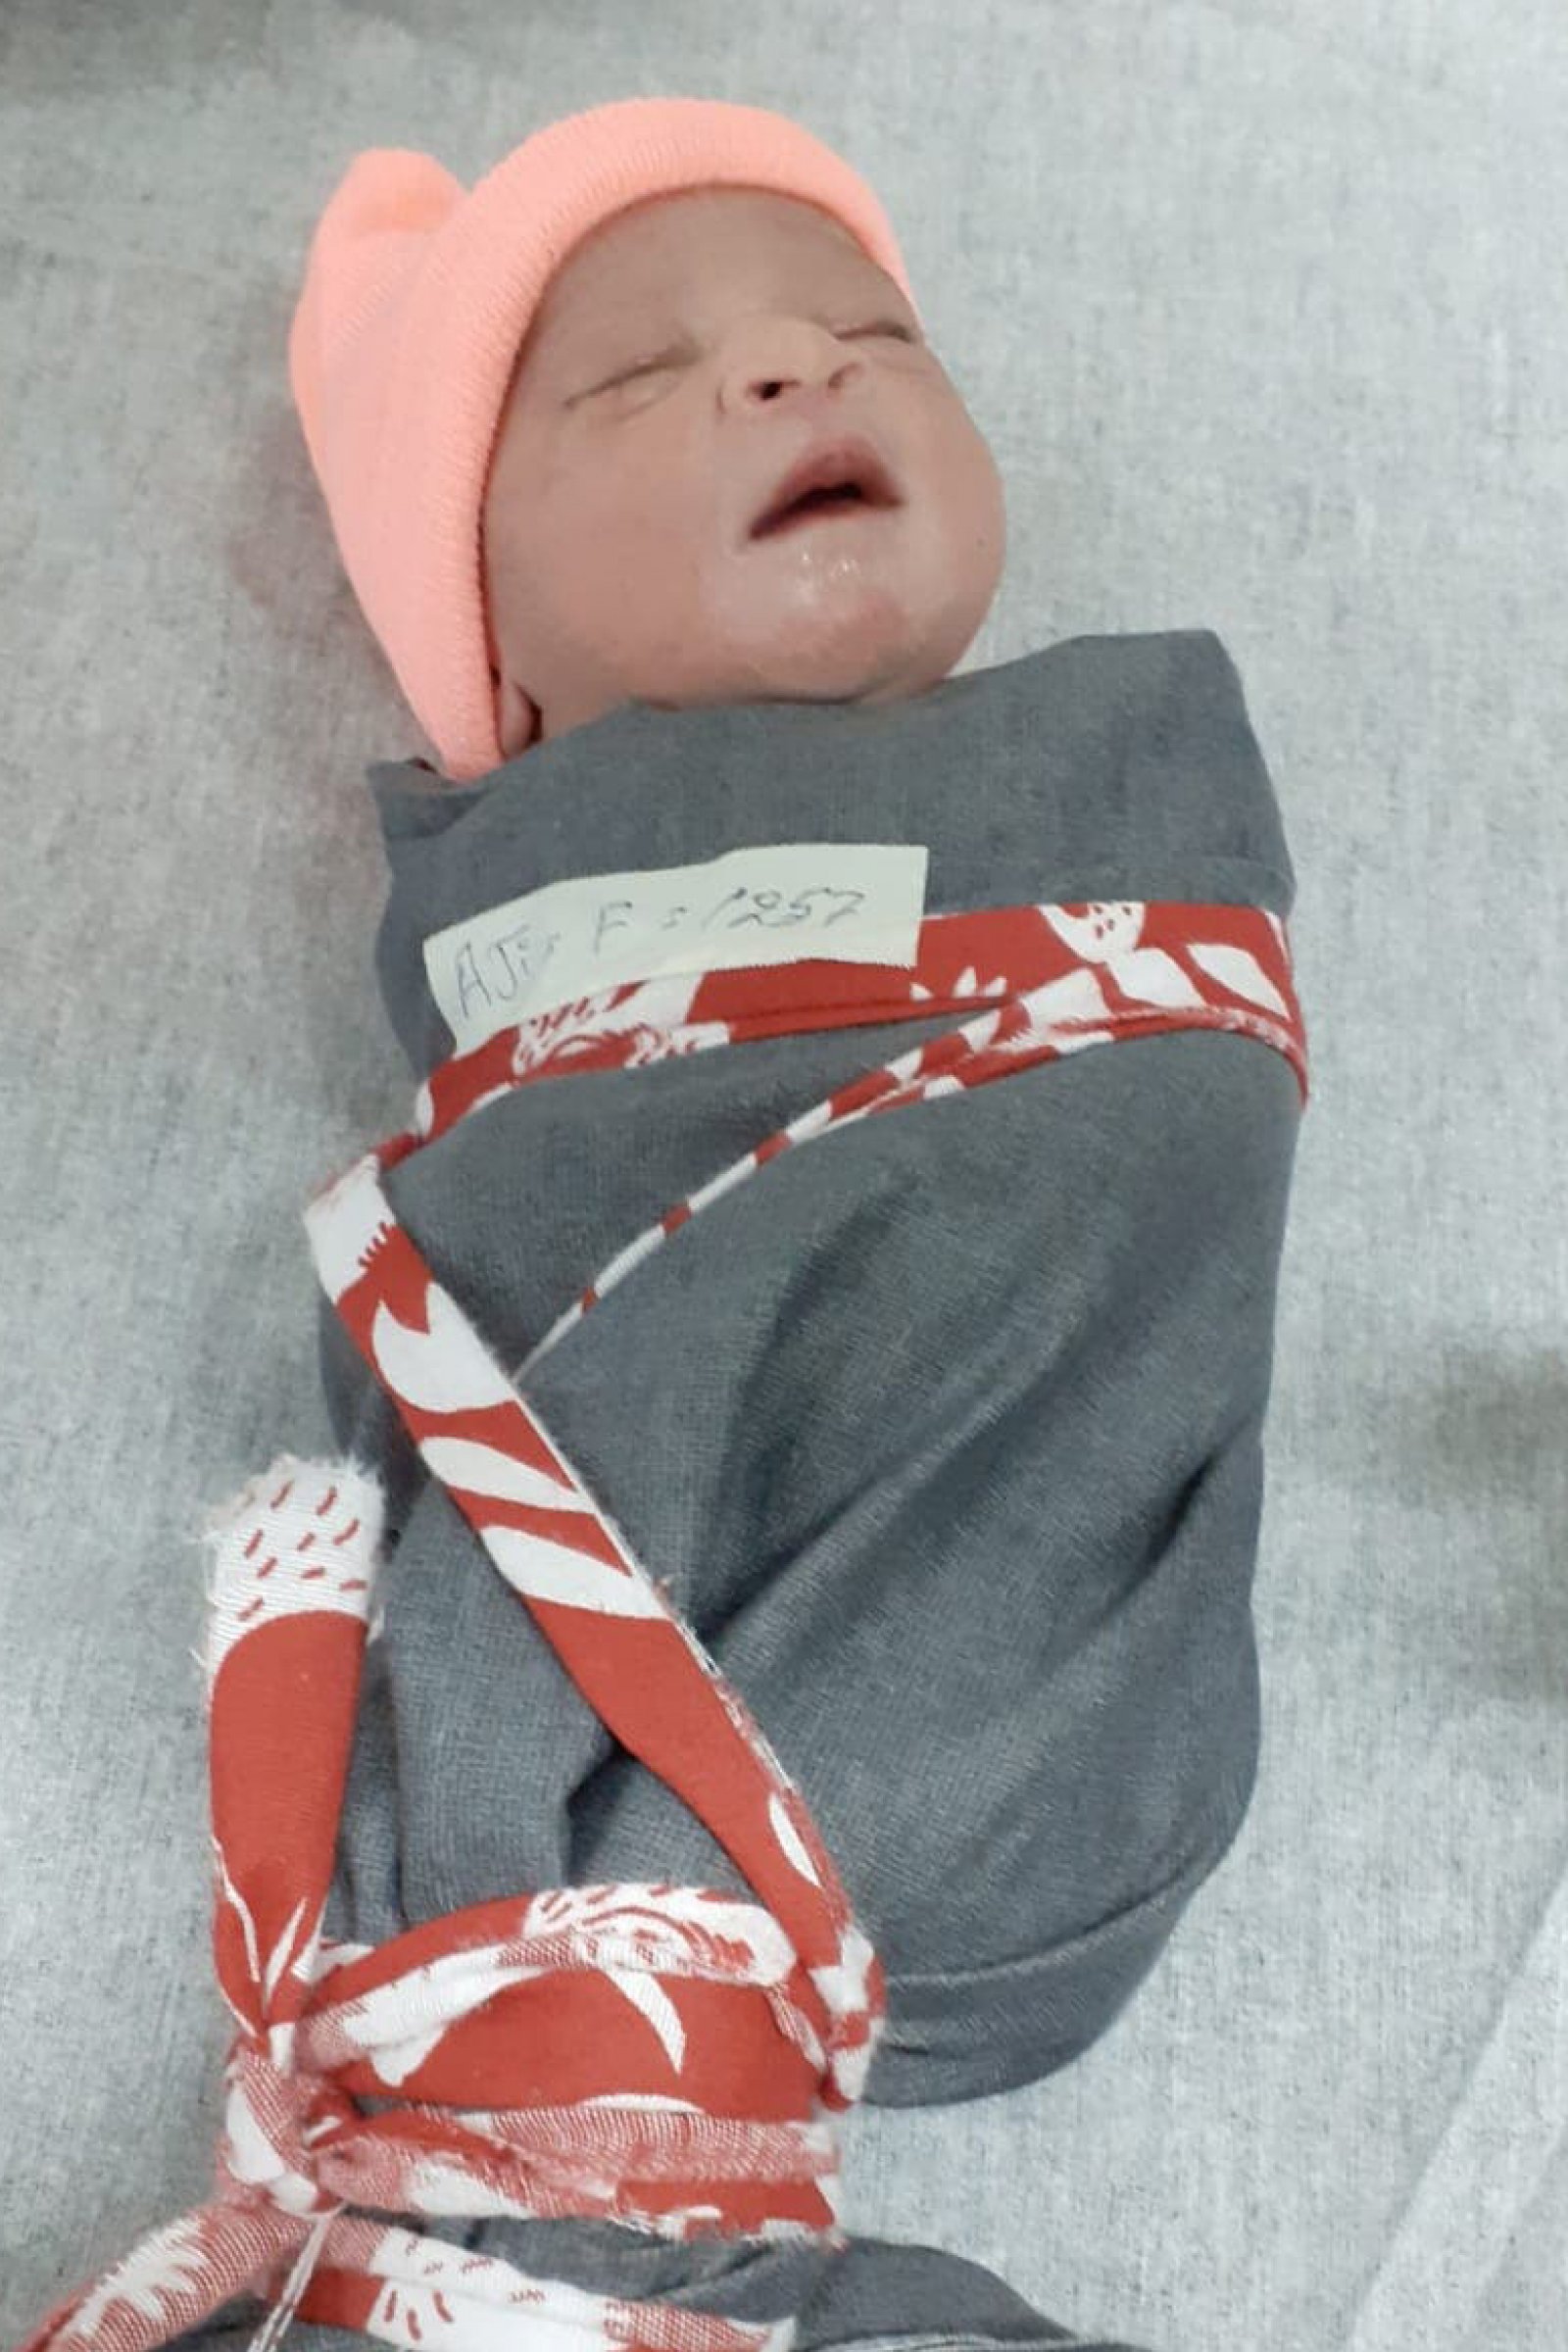 The first baby of 2021 born at the MSF maternity unit in Khost, Afghanistan